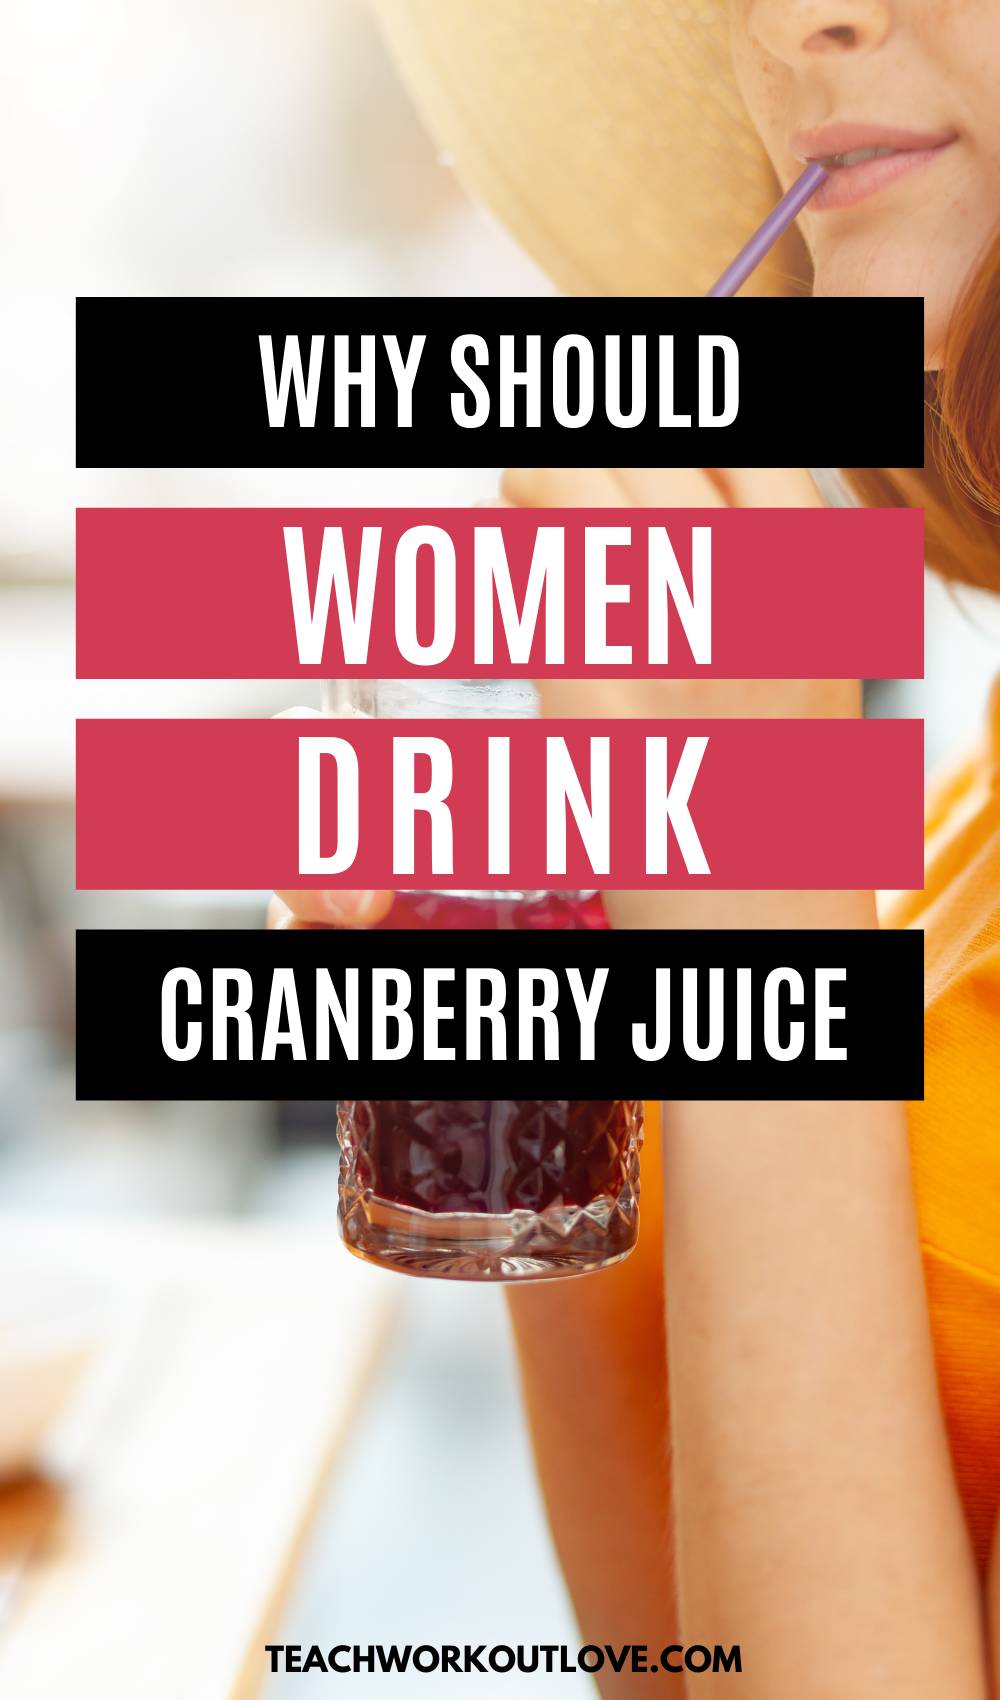 Did you know UTI's are more common in women? Cranberry juice for UTI is a universal cure. Let’s learn why drinking cranberry juice for UTI is a good idea.